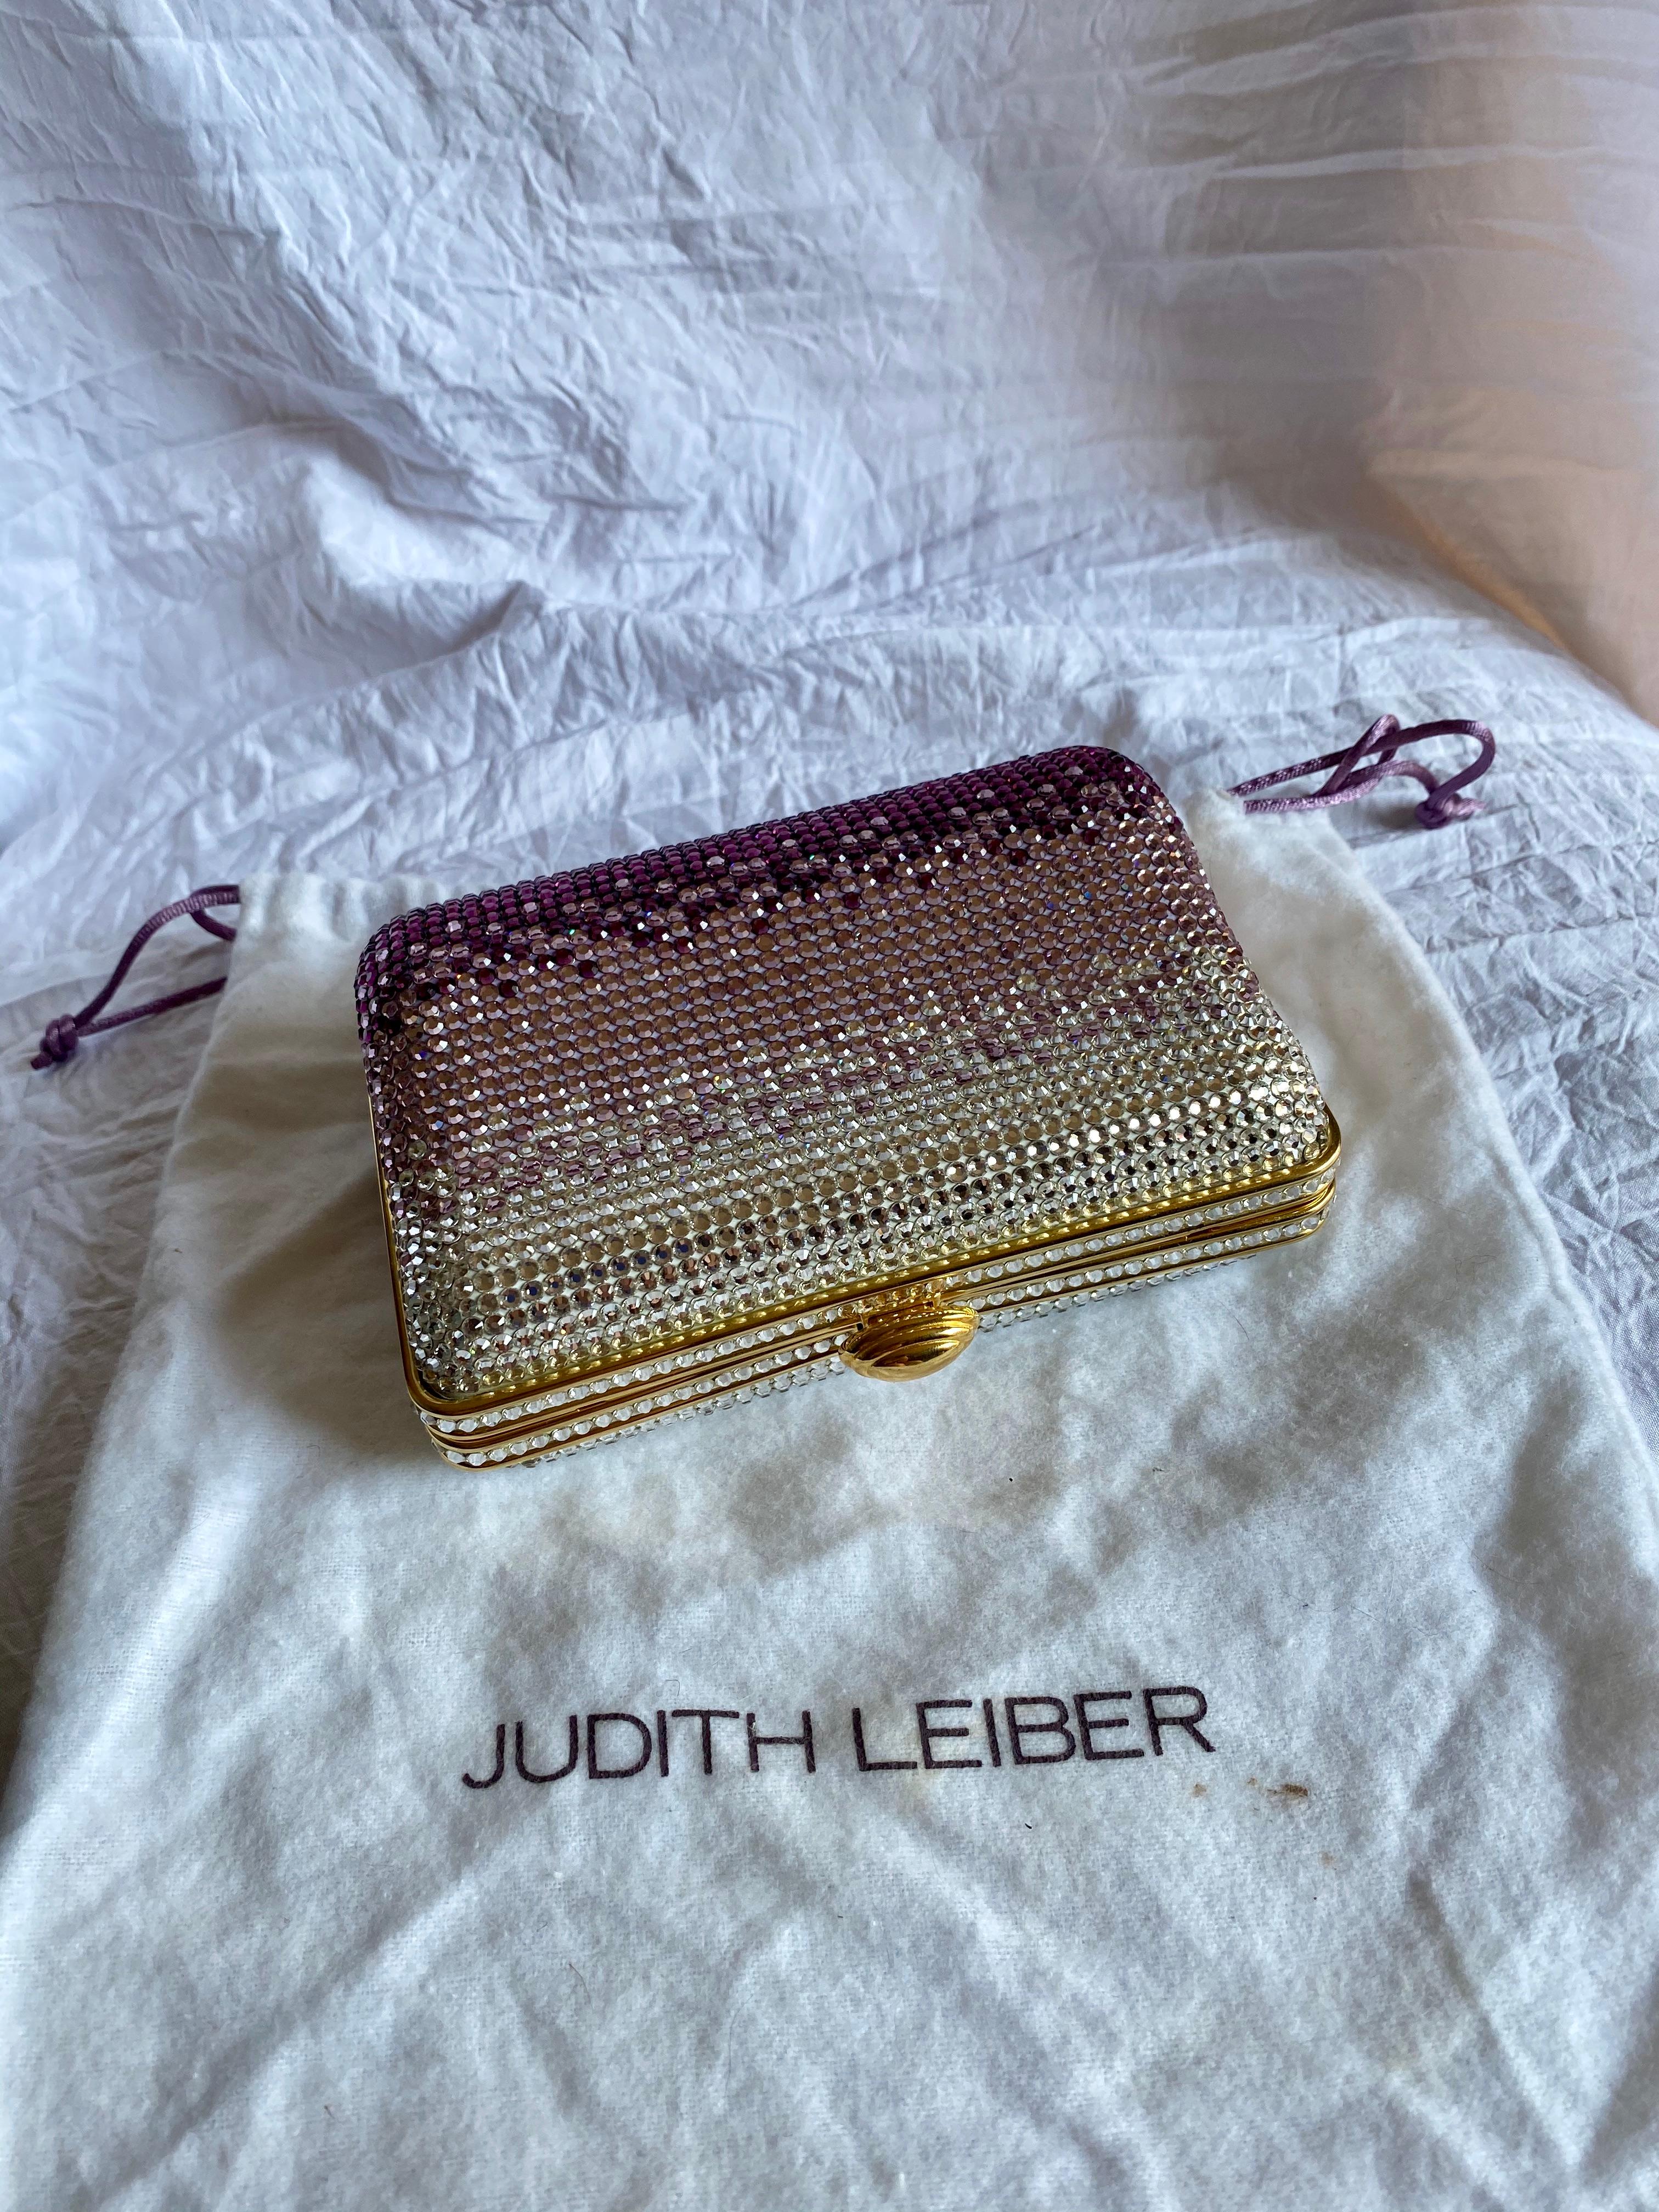 Judith Leiber Purple Ombre Evening Bag For Sale 3